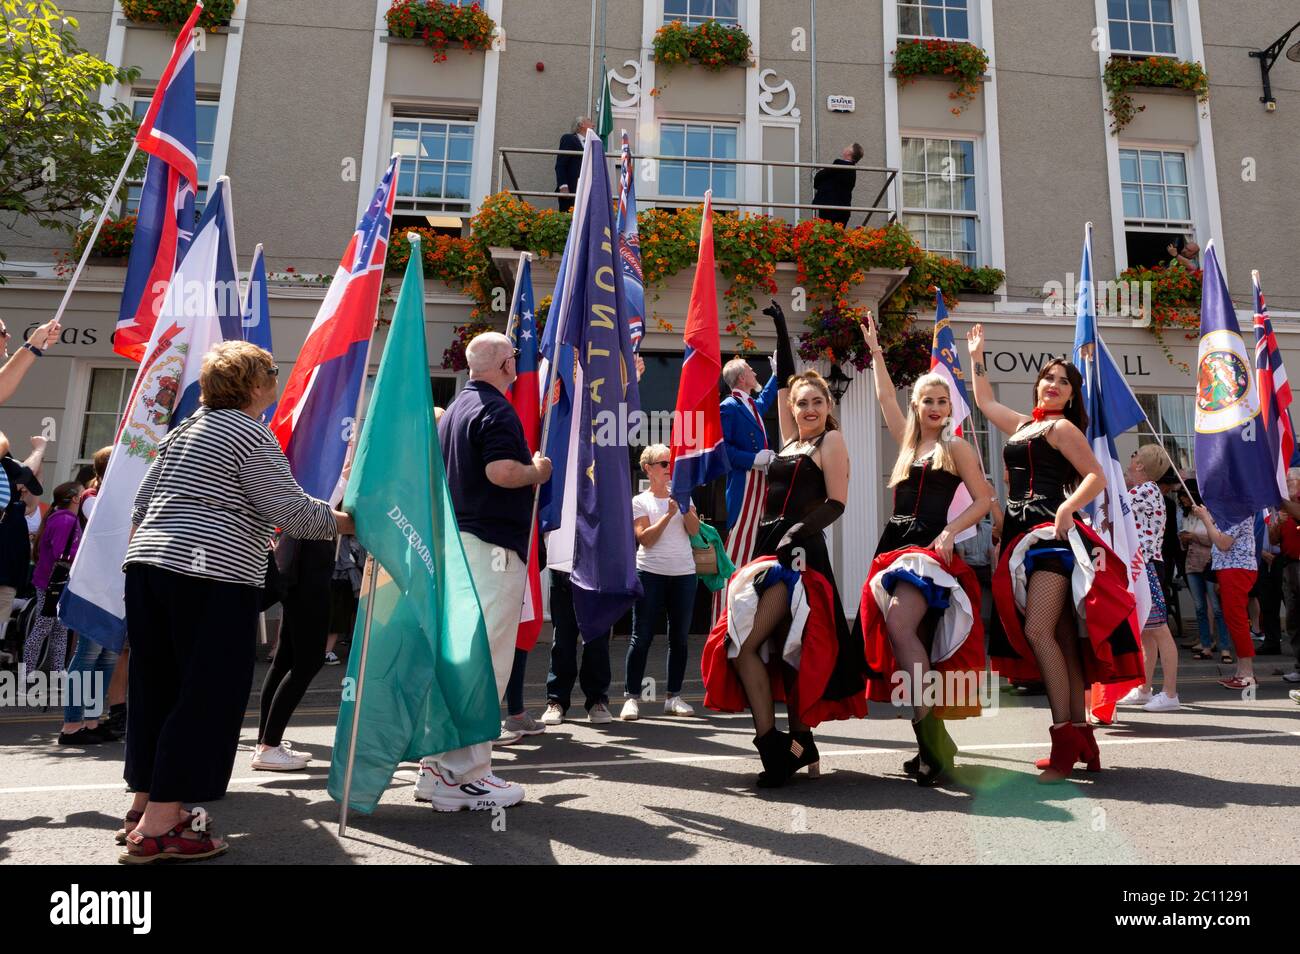 People with flags and burlesque dancers artists performers on street for the 4th of July Independence Day Parade and celebrations in Killarney County Kerry Ireland Stock Photo